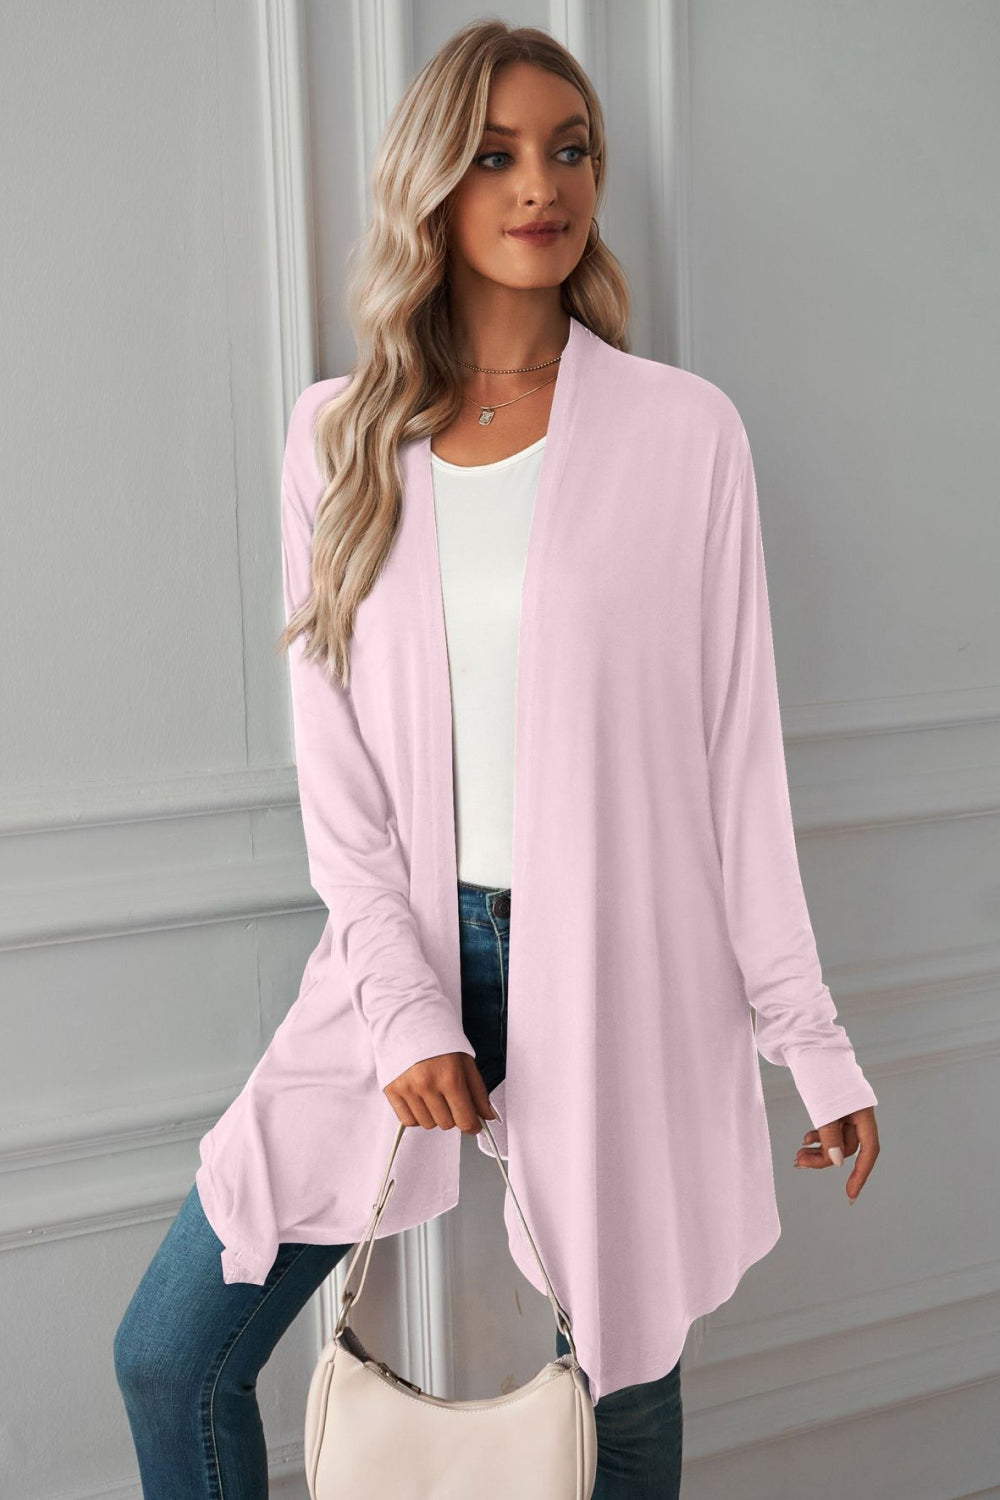 Open Front Long Sleeve Cardigan - Pink / S - Women’s Clothing & Accessories - Shirts & Tops - 9 - 2024